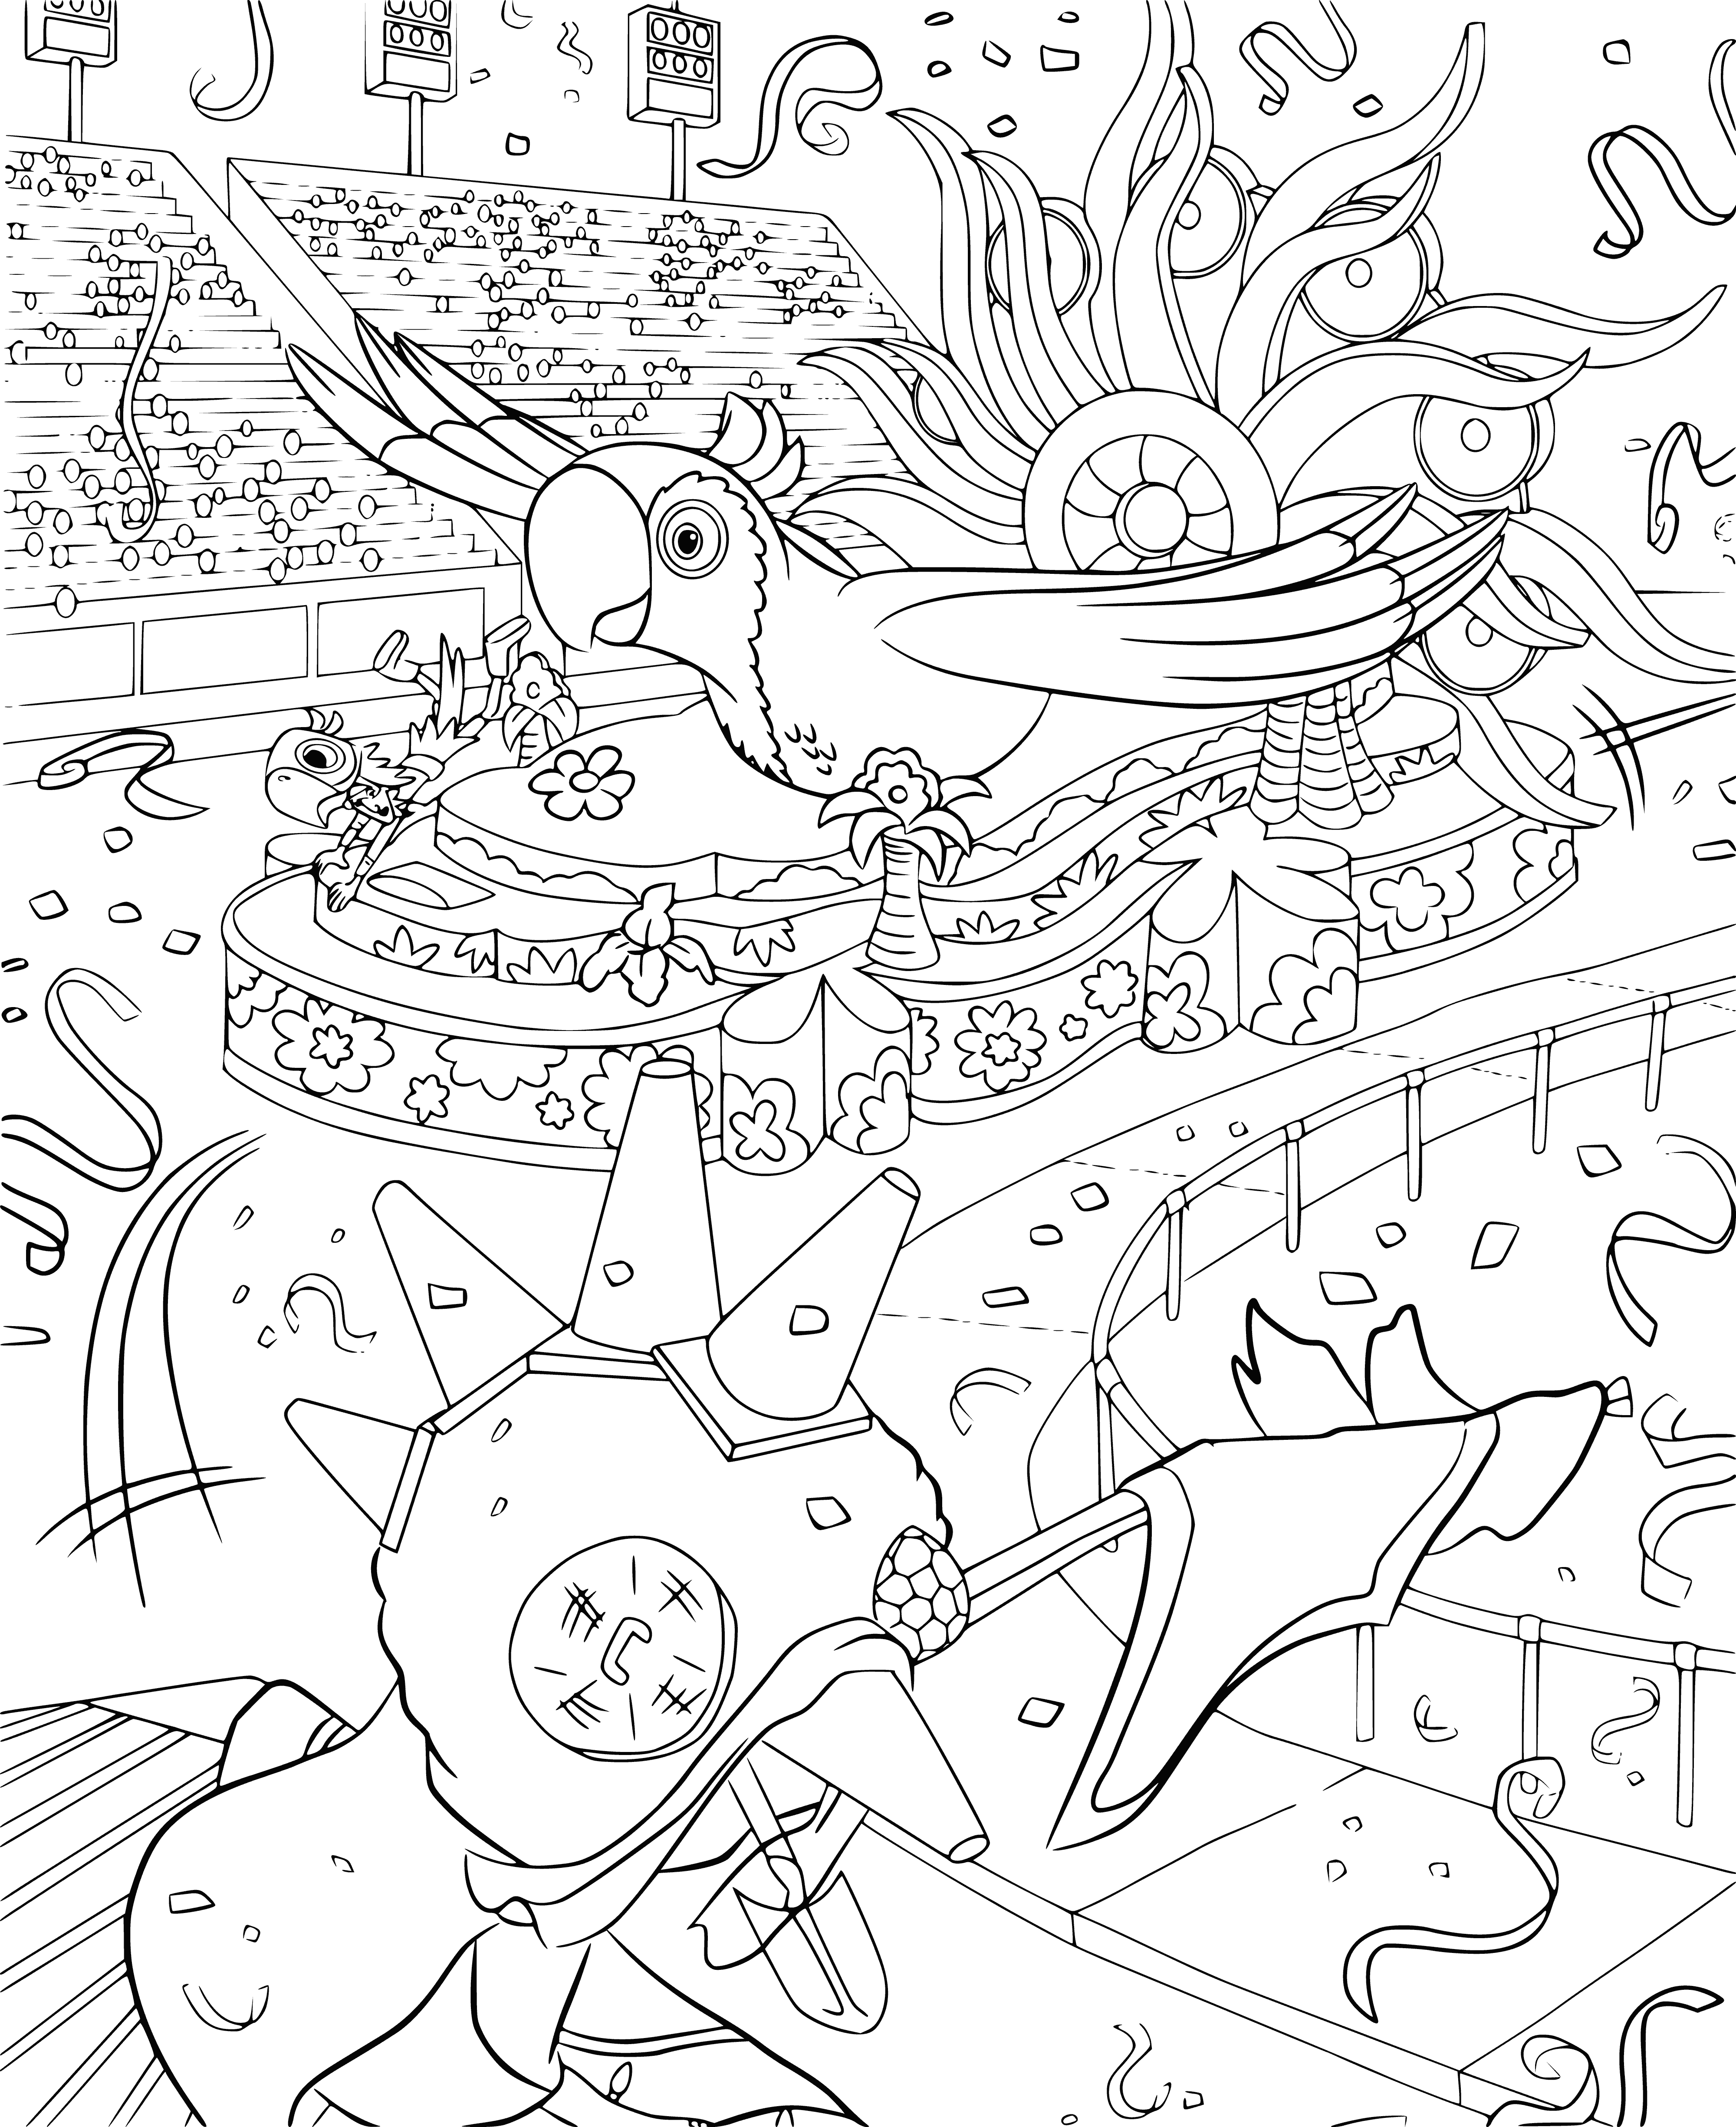 coloring page: Large, colorful buildings, fit many people & look of crowds on sidewalks & streets.